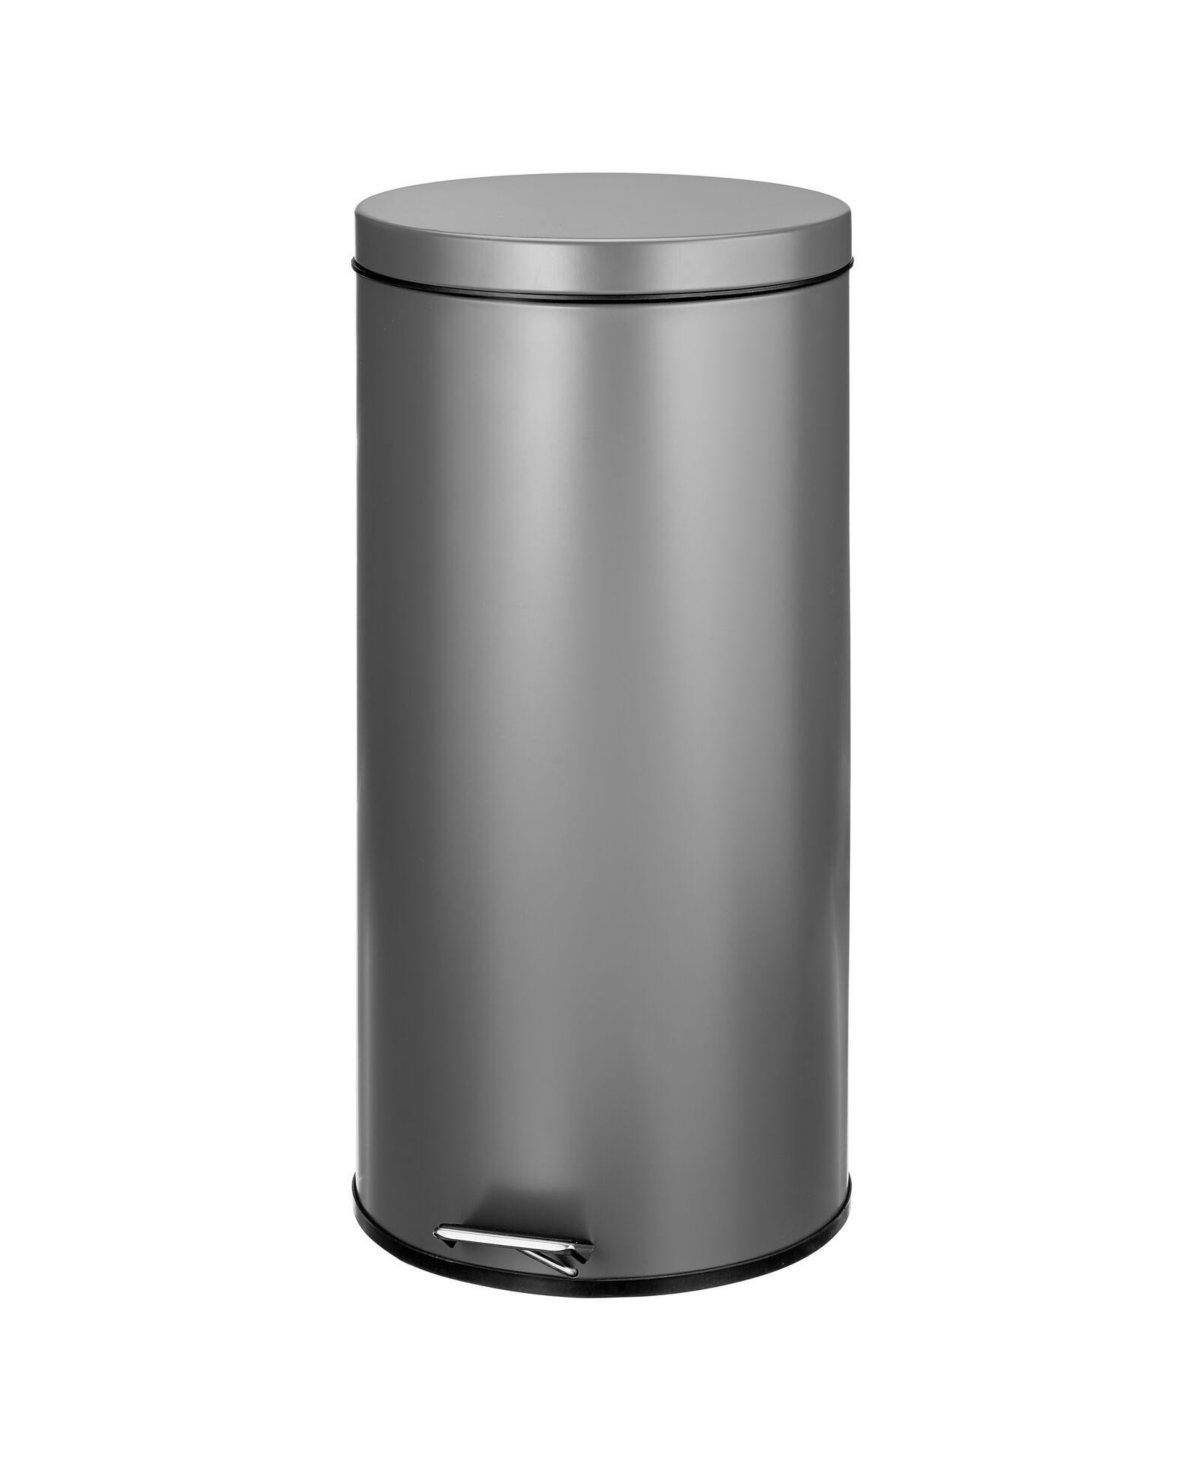 Round Metal Step Trash Can, Liner/Handle - Graphite